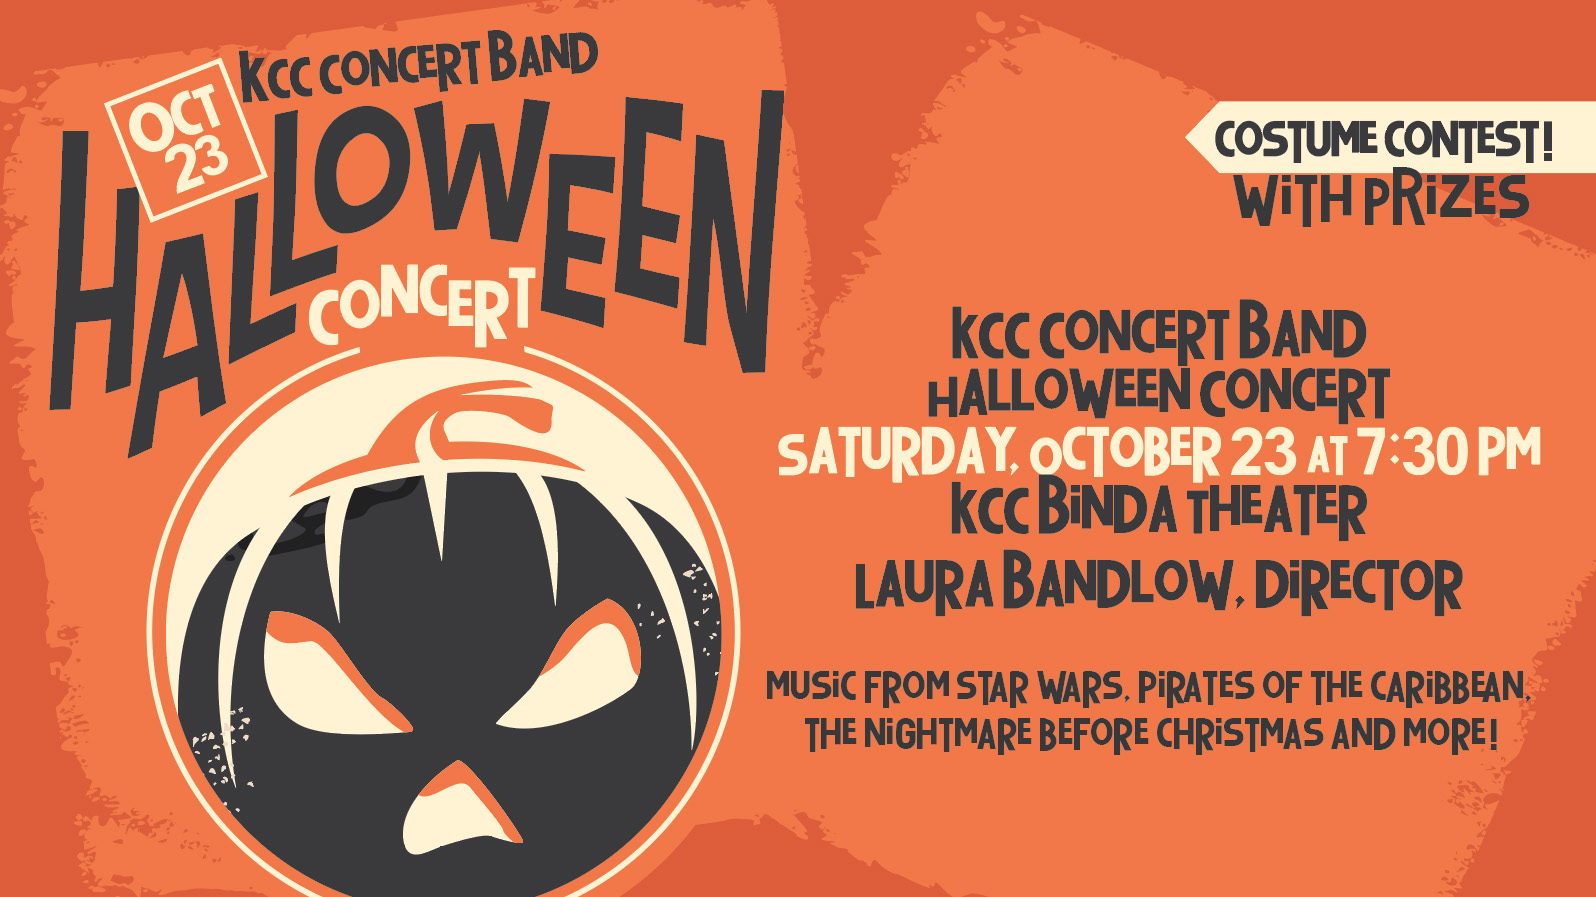 A decorative text slide featuring an illustration of a jack-o'-lantern and text about the event that's included in the post.